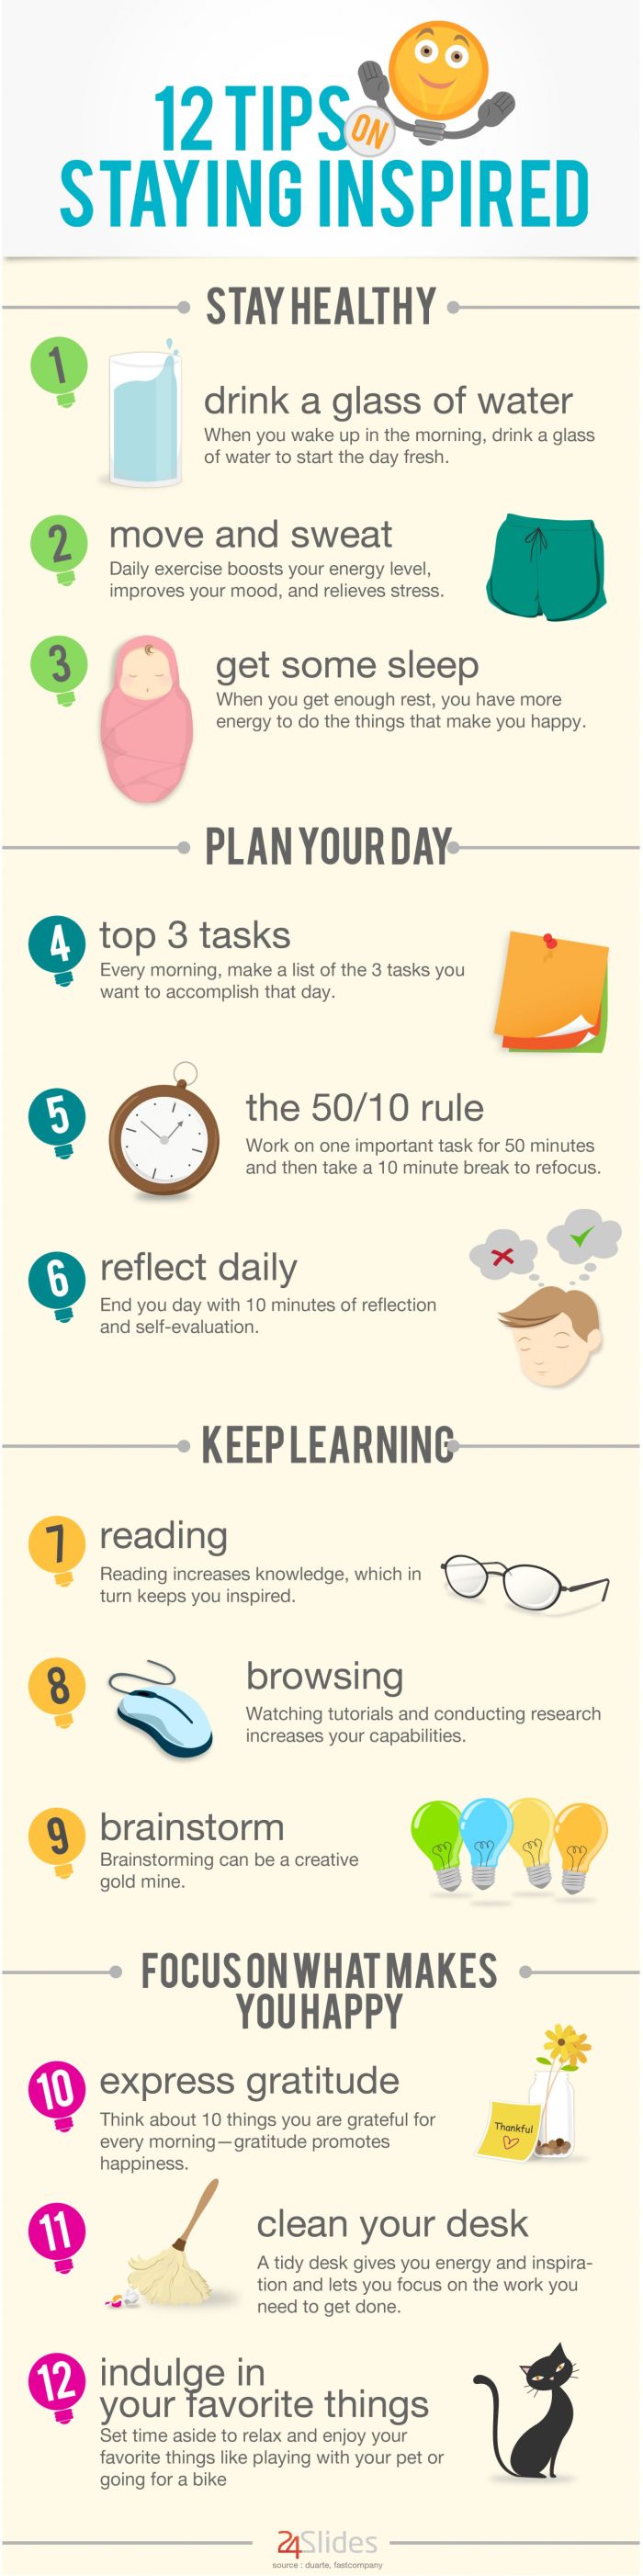 How To Stay Inspired And Happy (infographic)